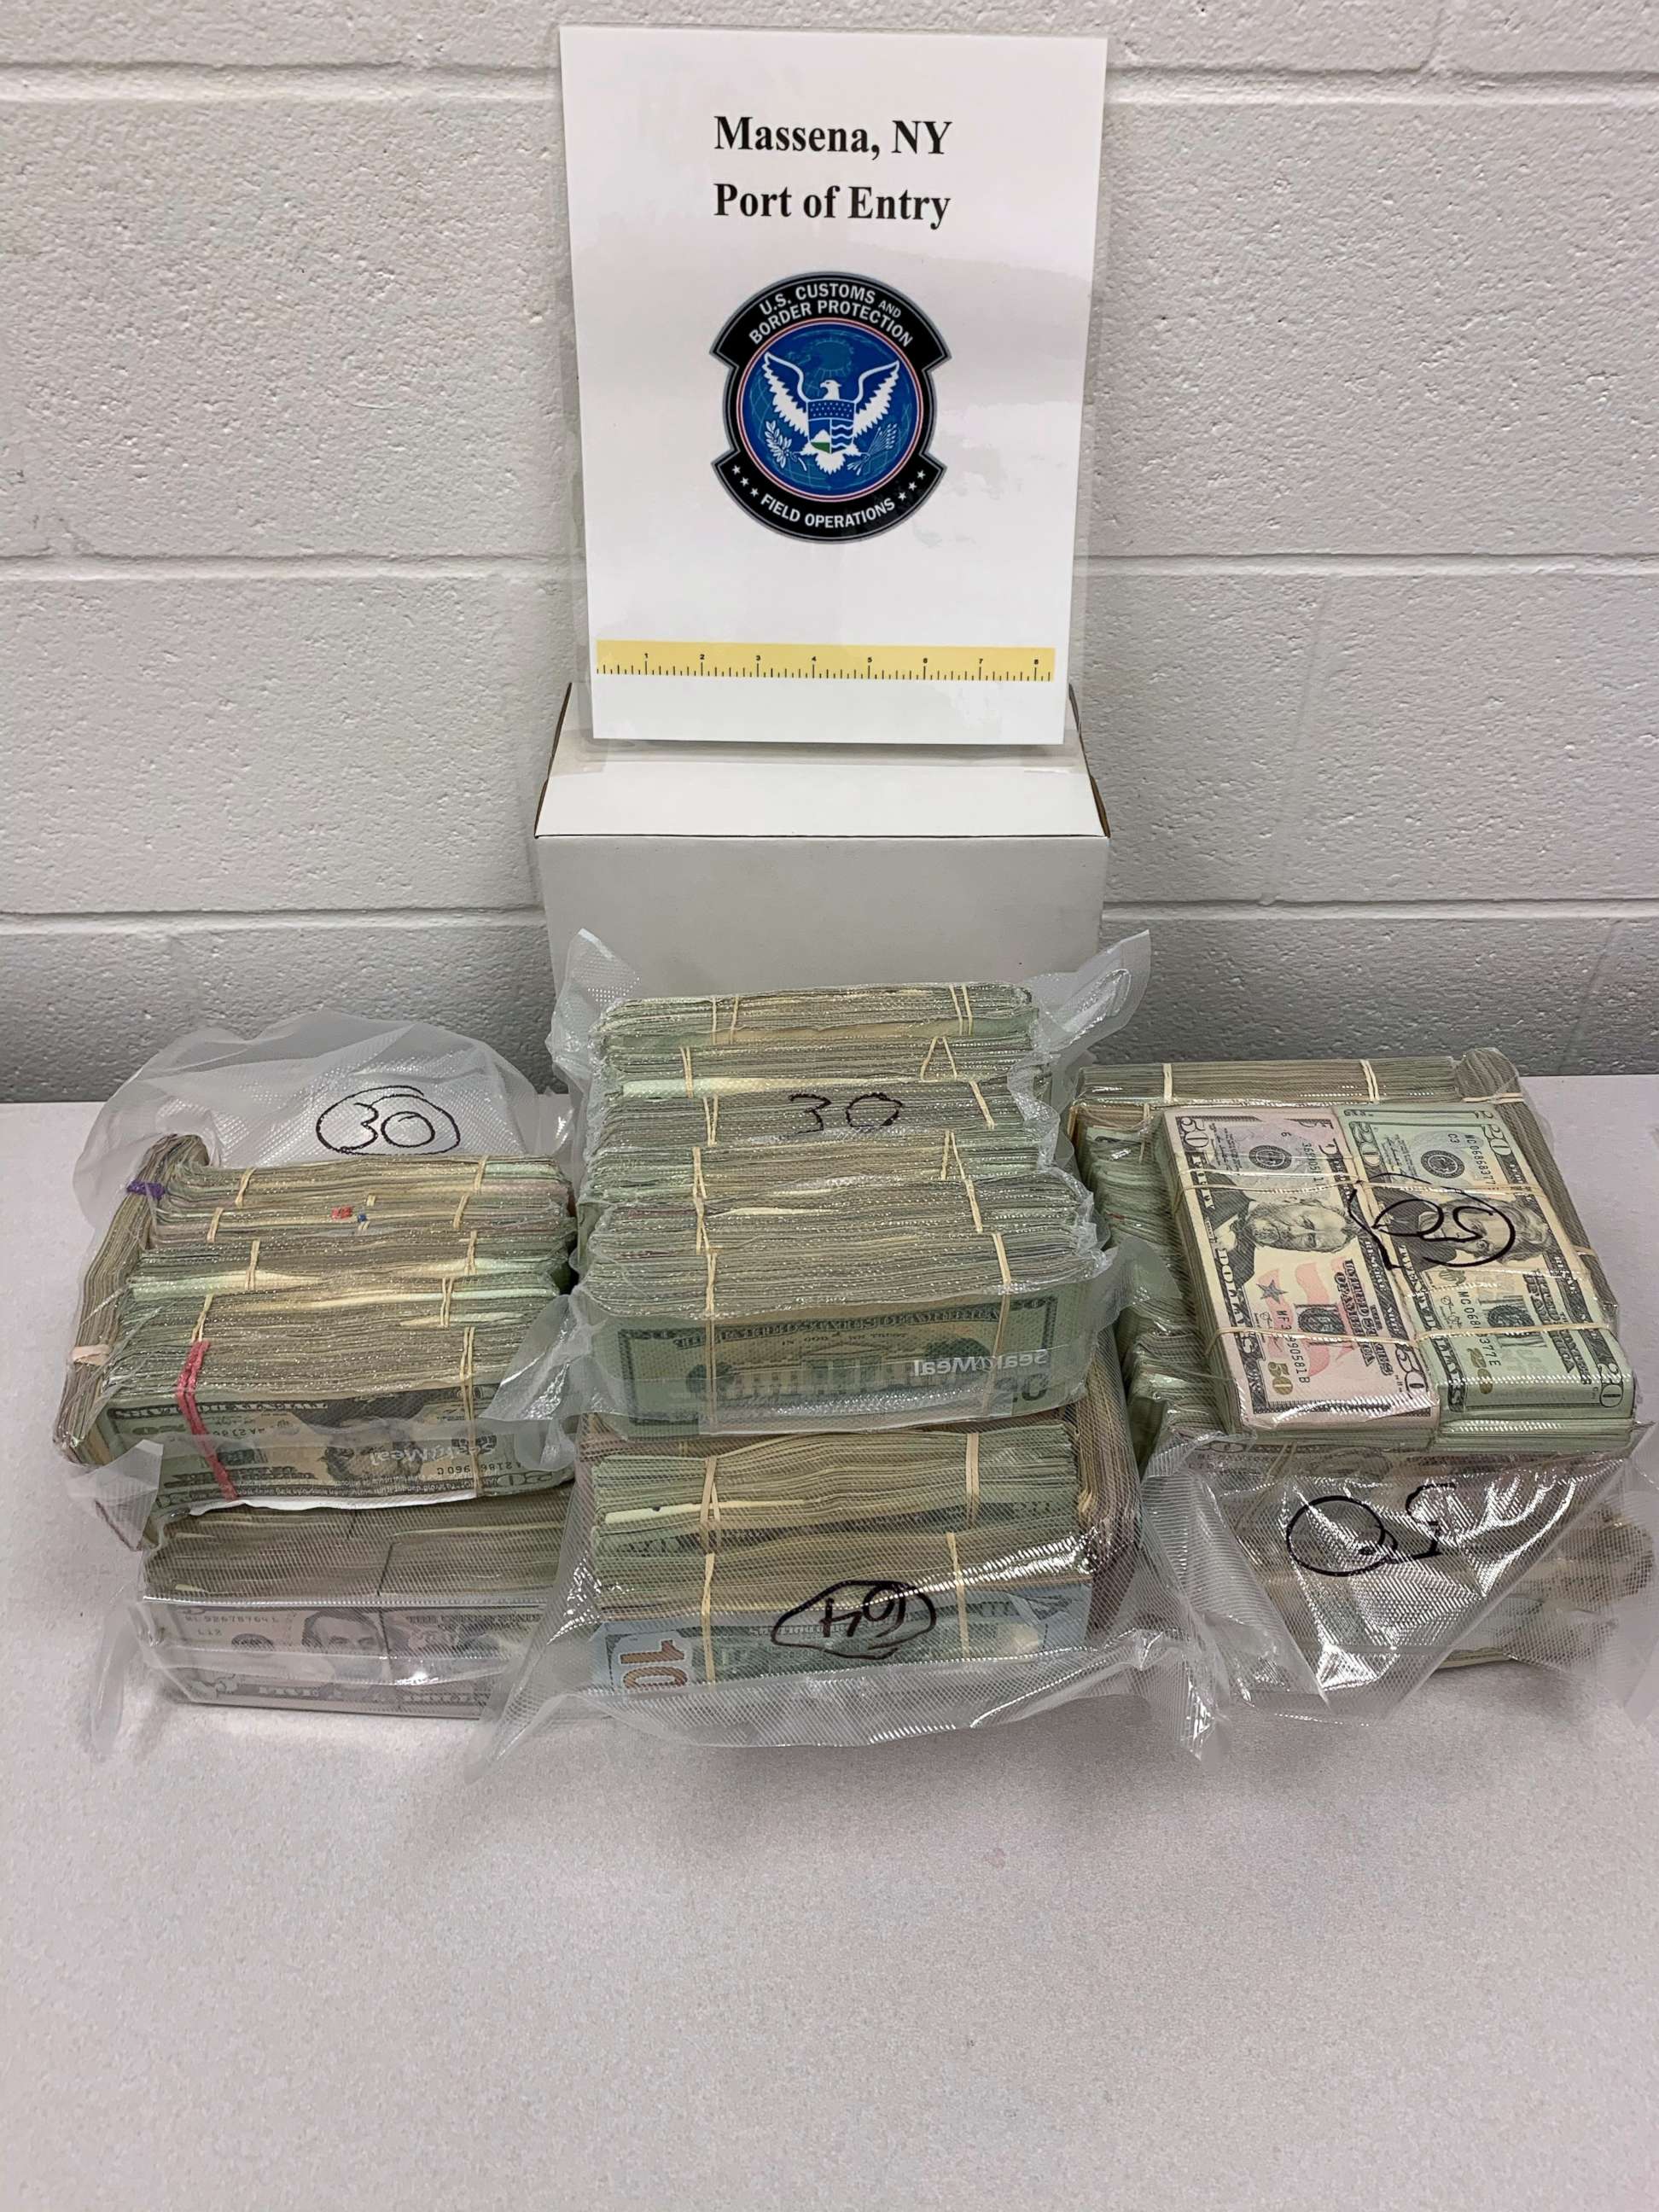 PHOTO: Bundles of currency seized at the border of New York and Canada are seen in an undated handout photo from U.S. Customs and Border Protection.